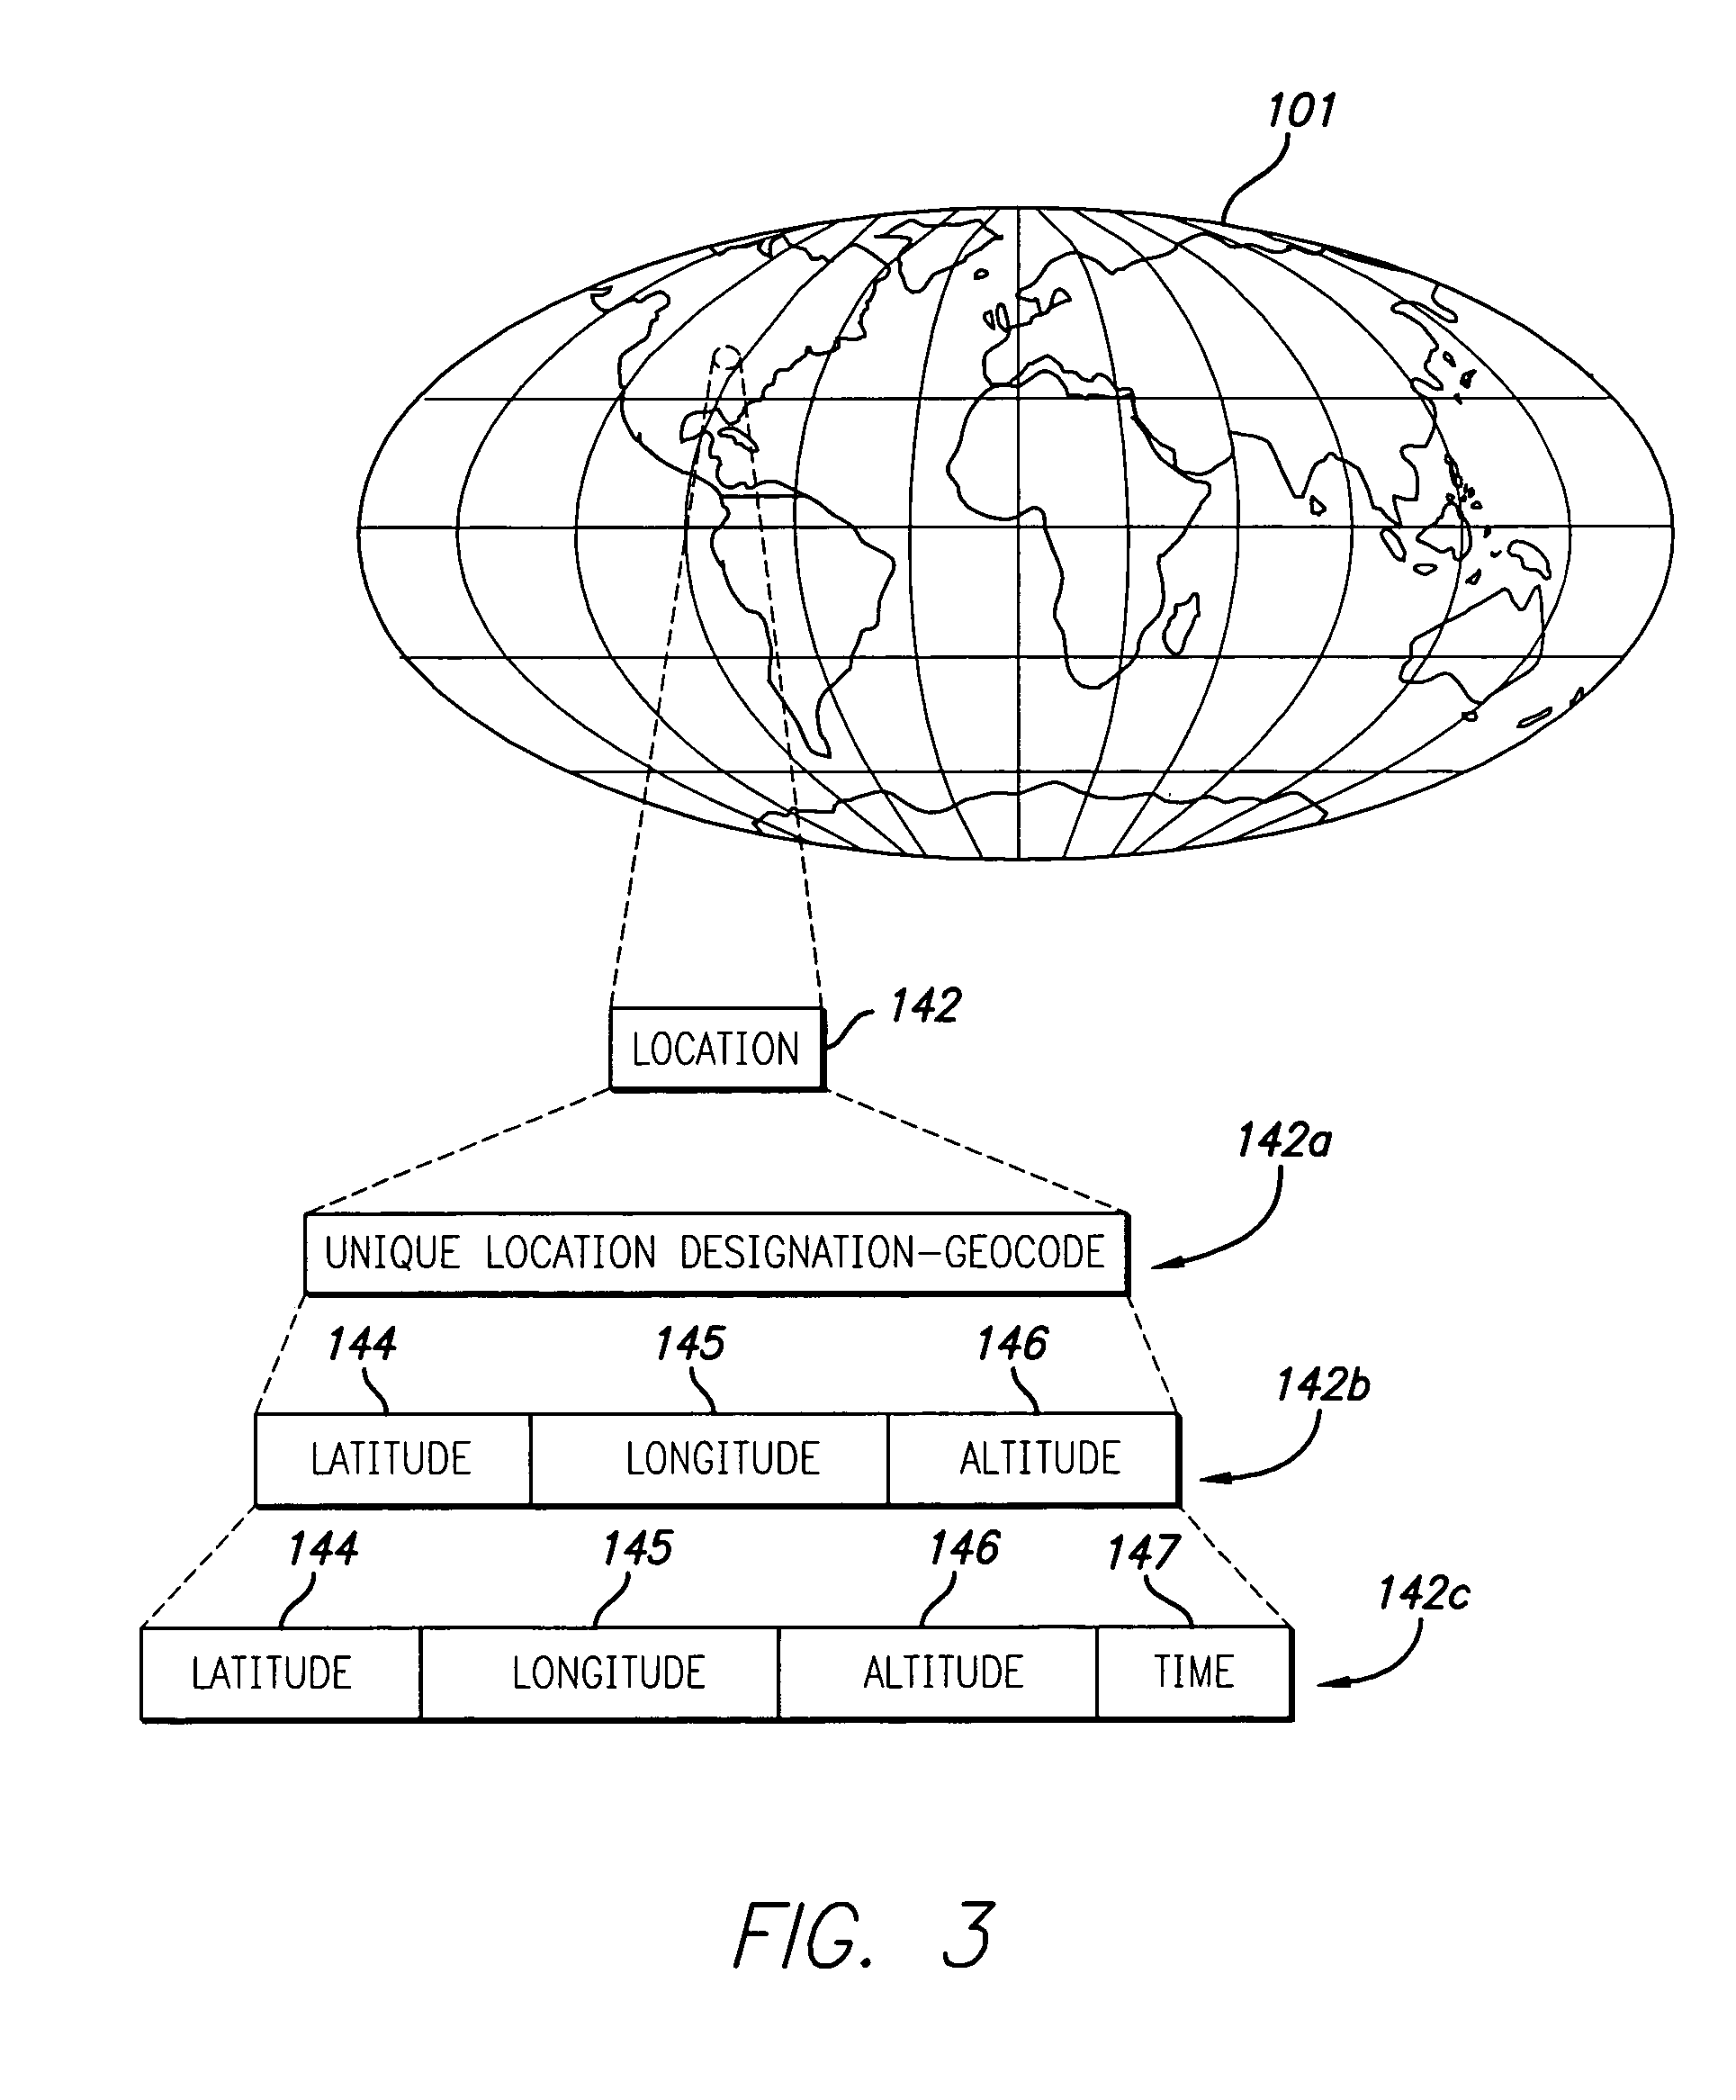 System and method for using location identity to control access to digital information